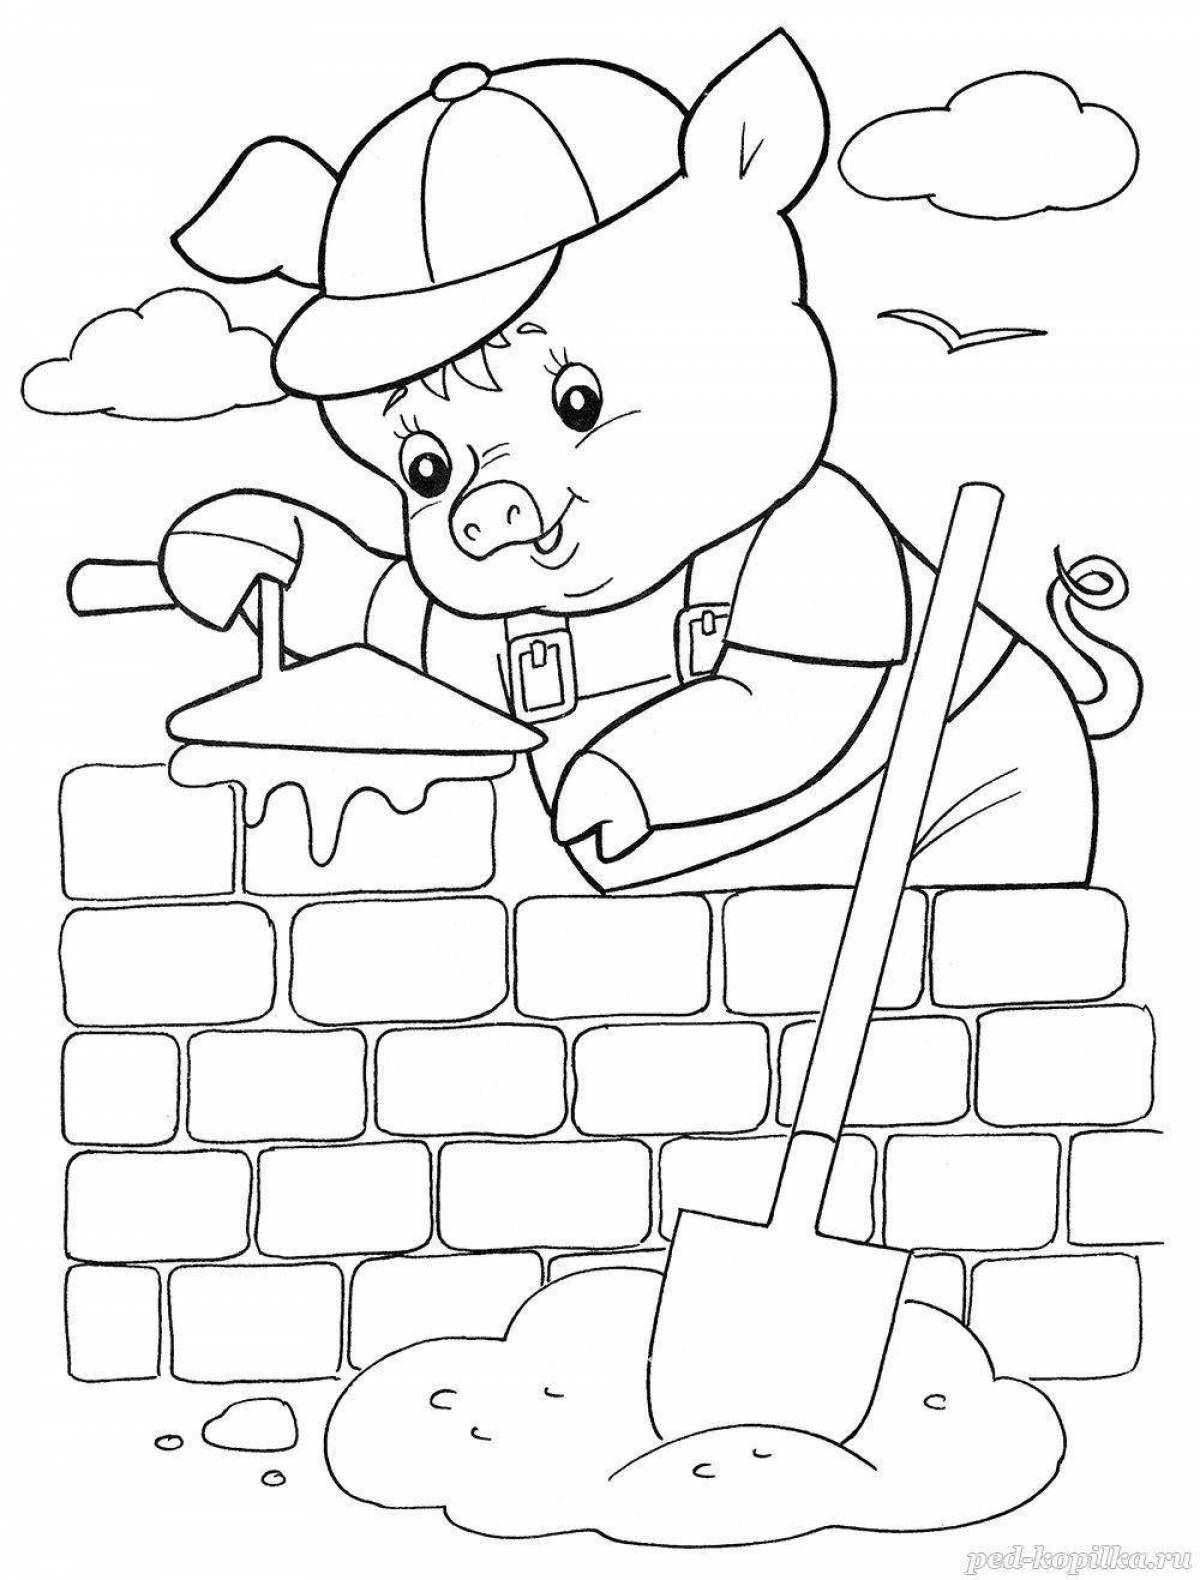 Amazing coloring pages 3 little pigs for kids